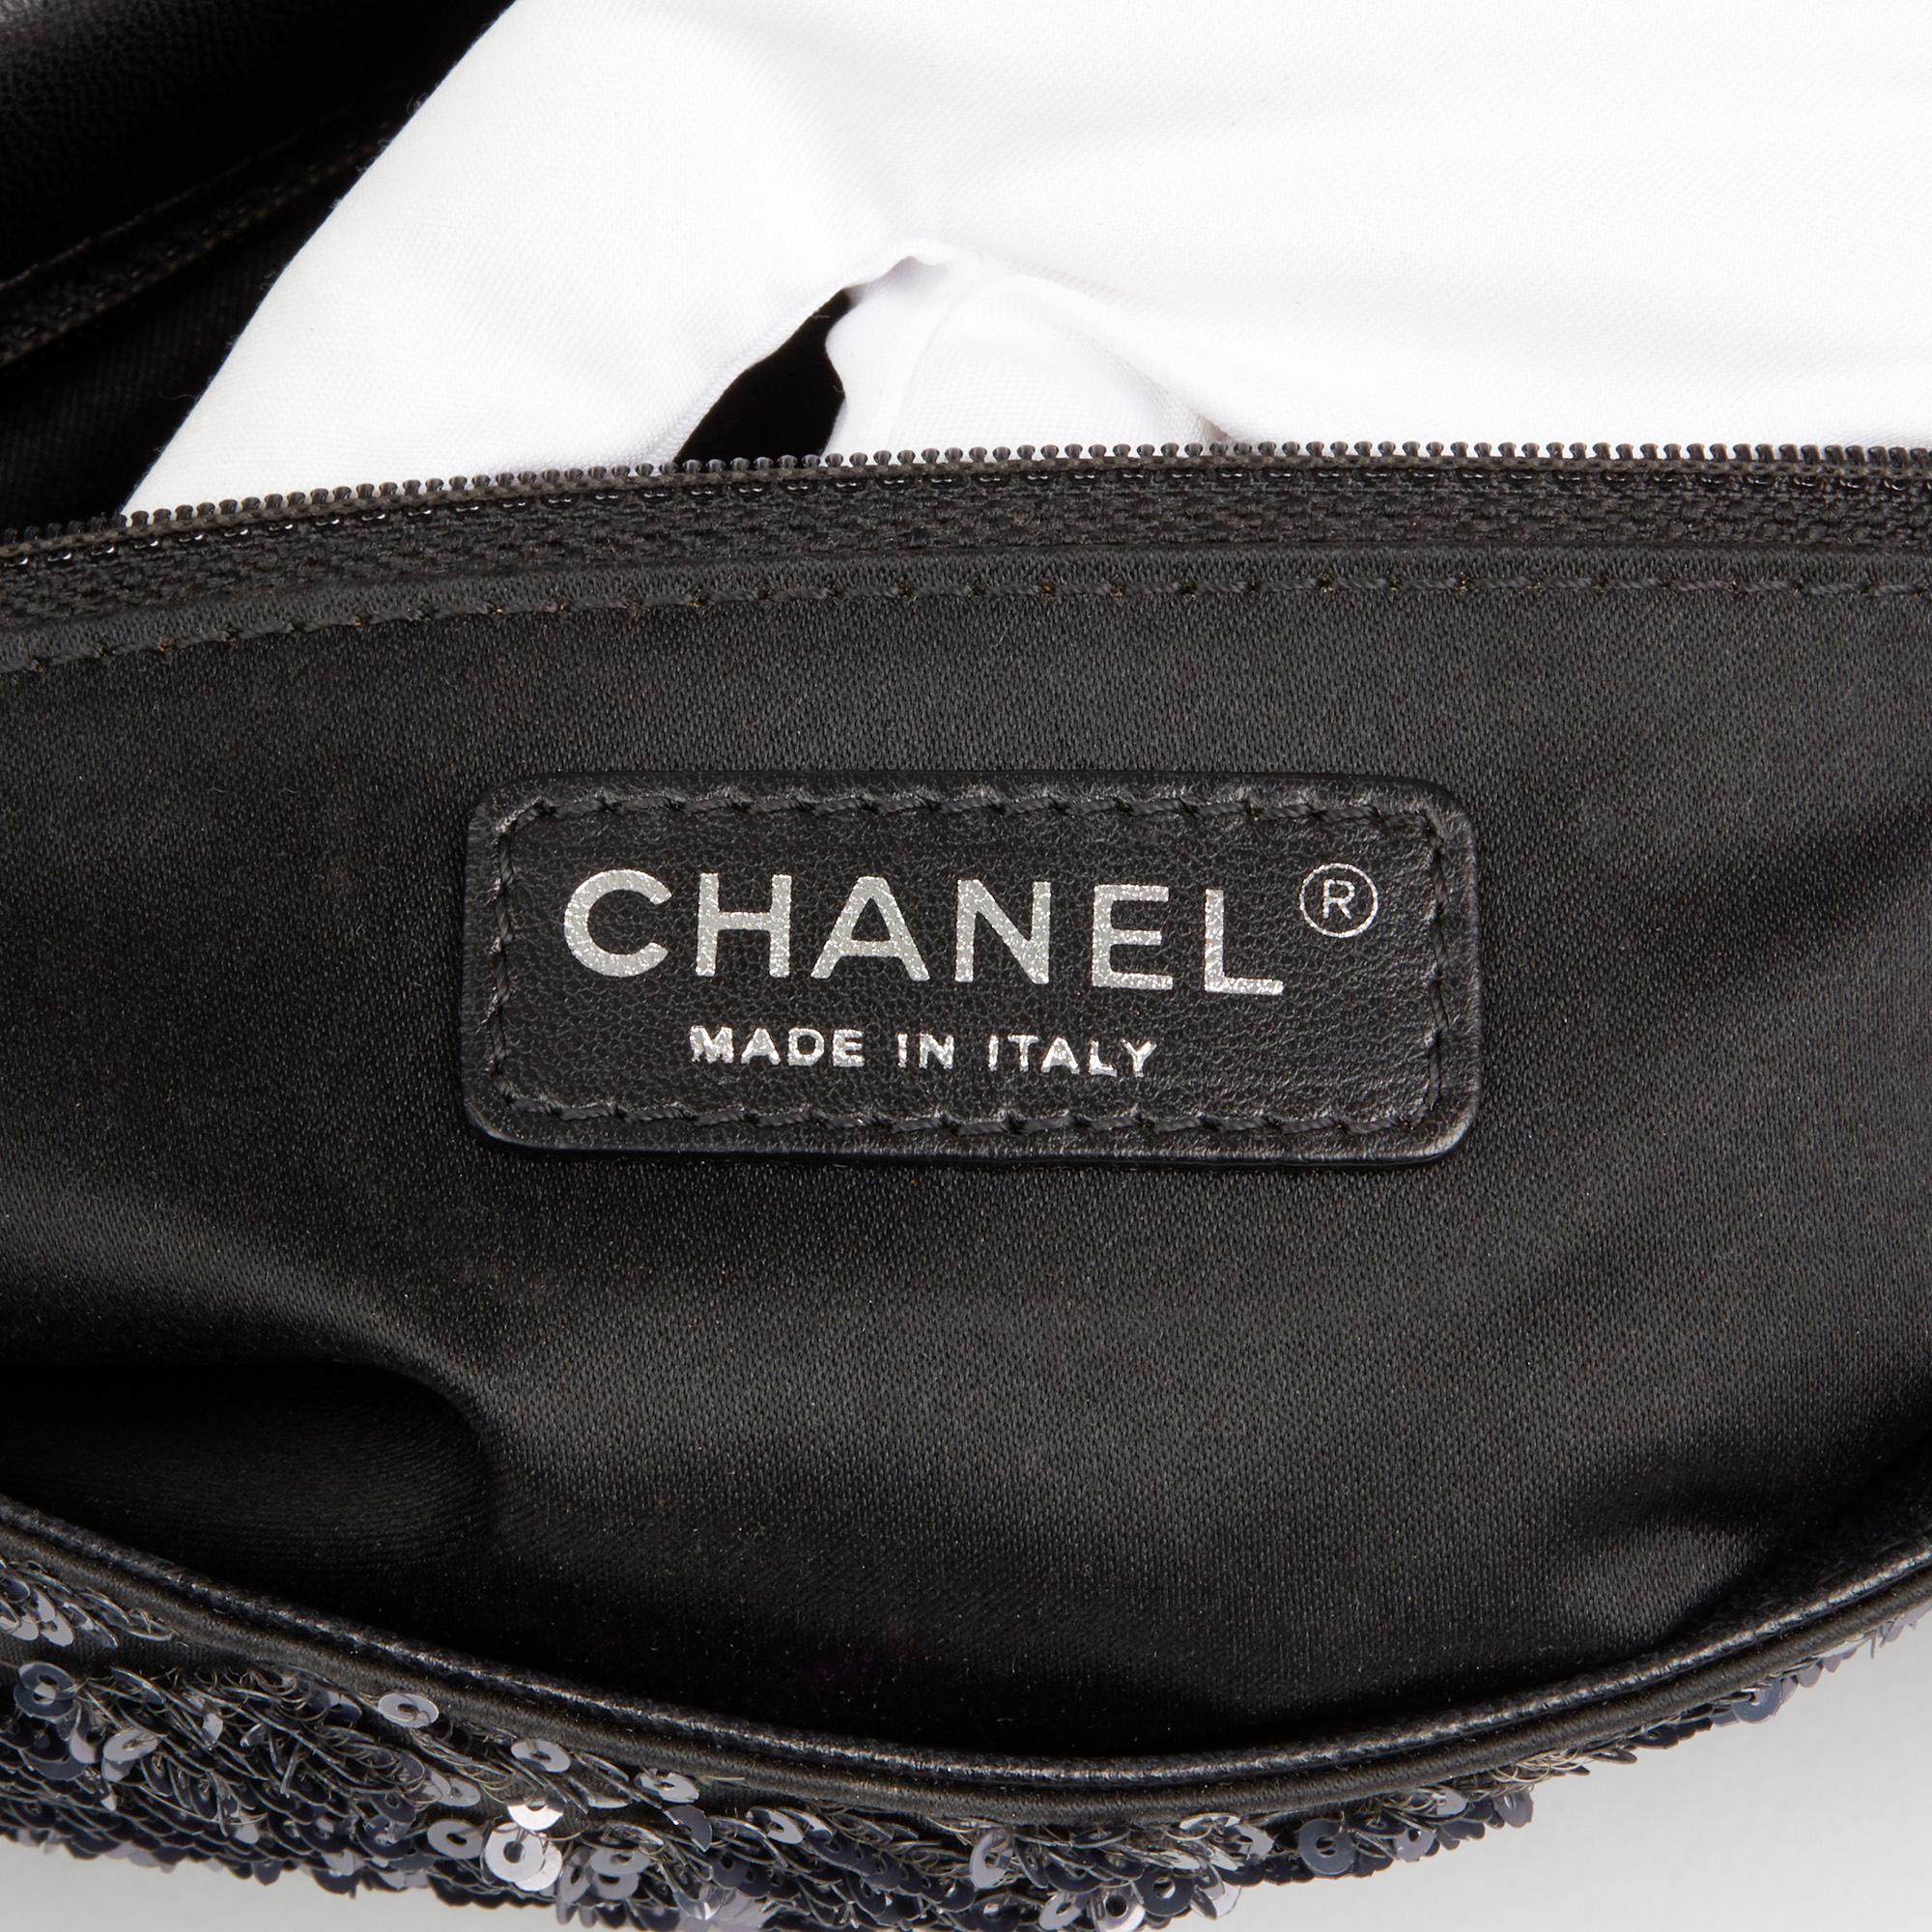 2013 Chanel Navy Sequin Embellished Classic Single Flap Bag 4